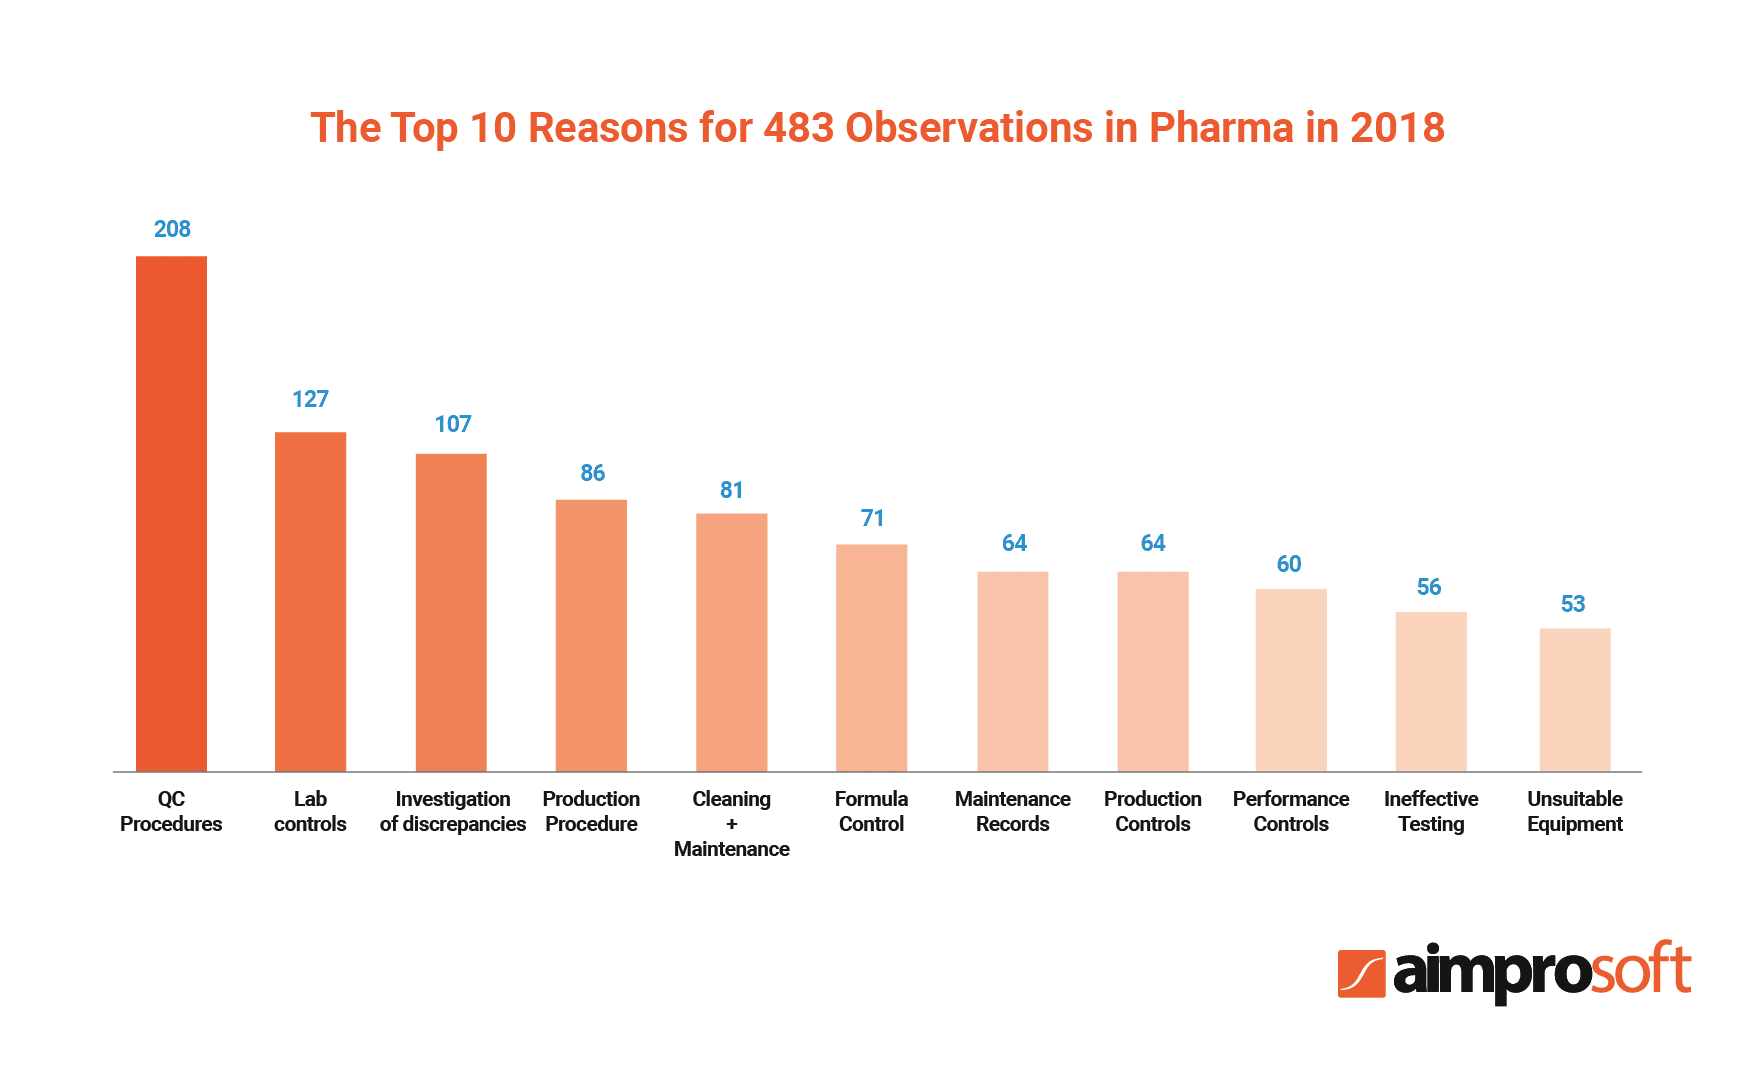 The top 10 reasons for 483 observations in the pharmaceutical industry in 2018